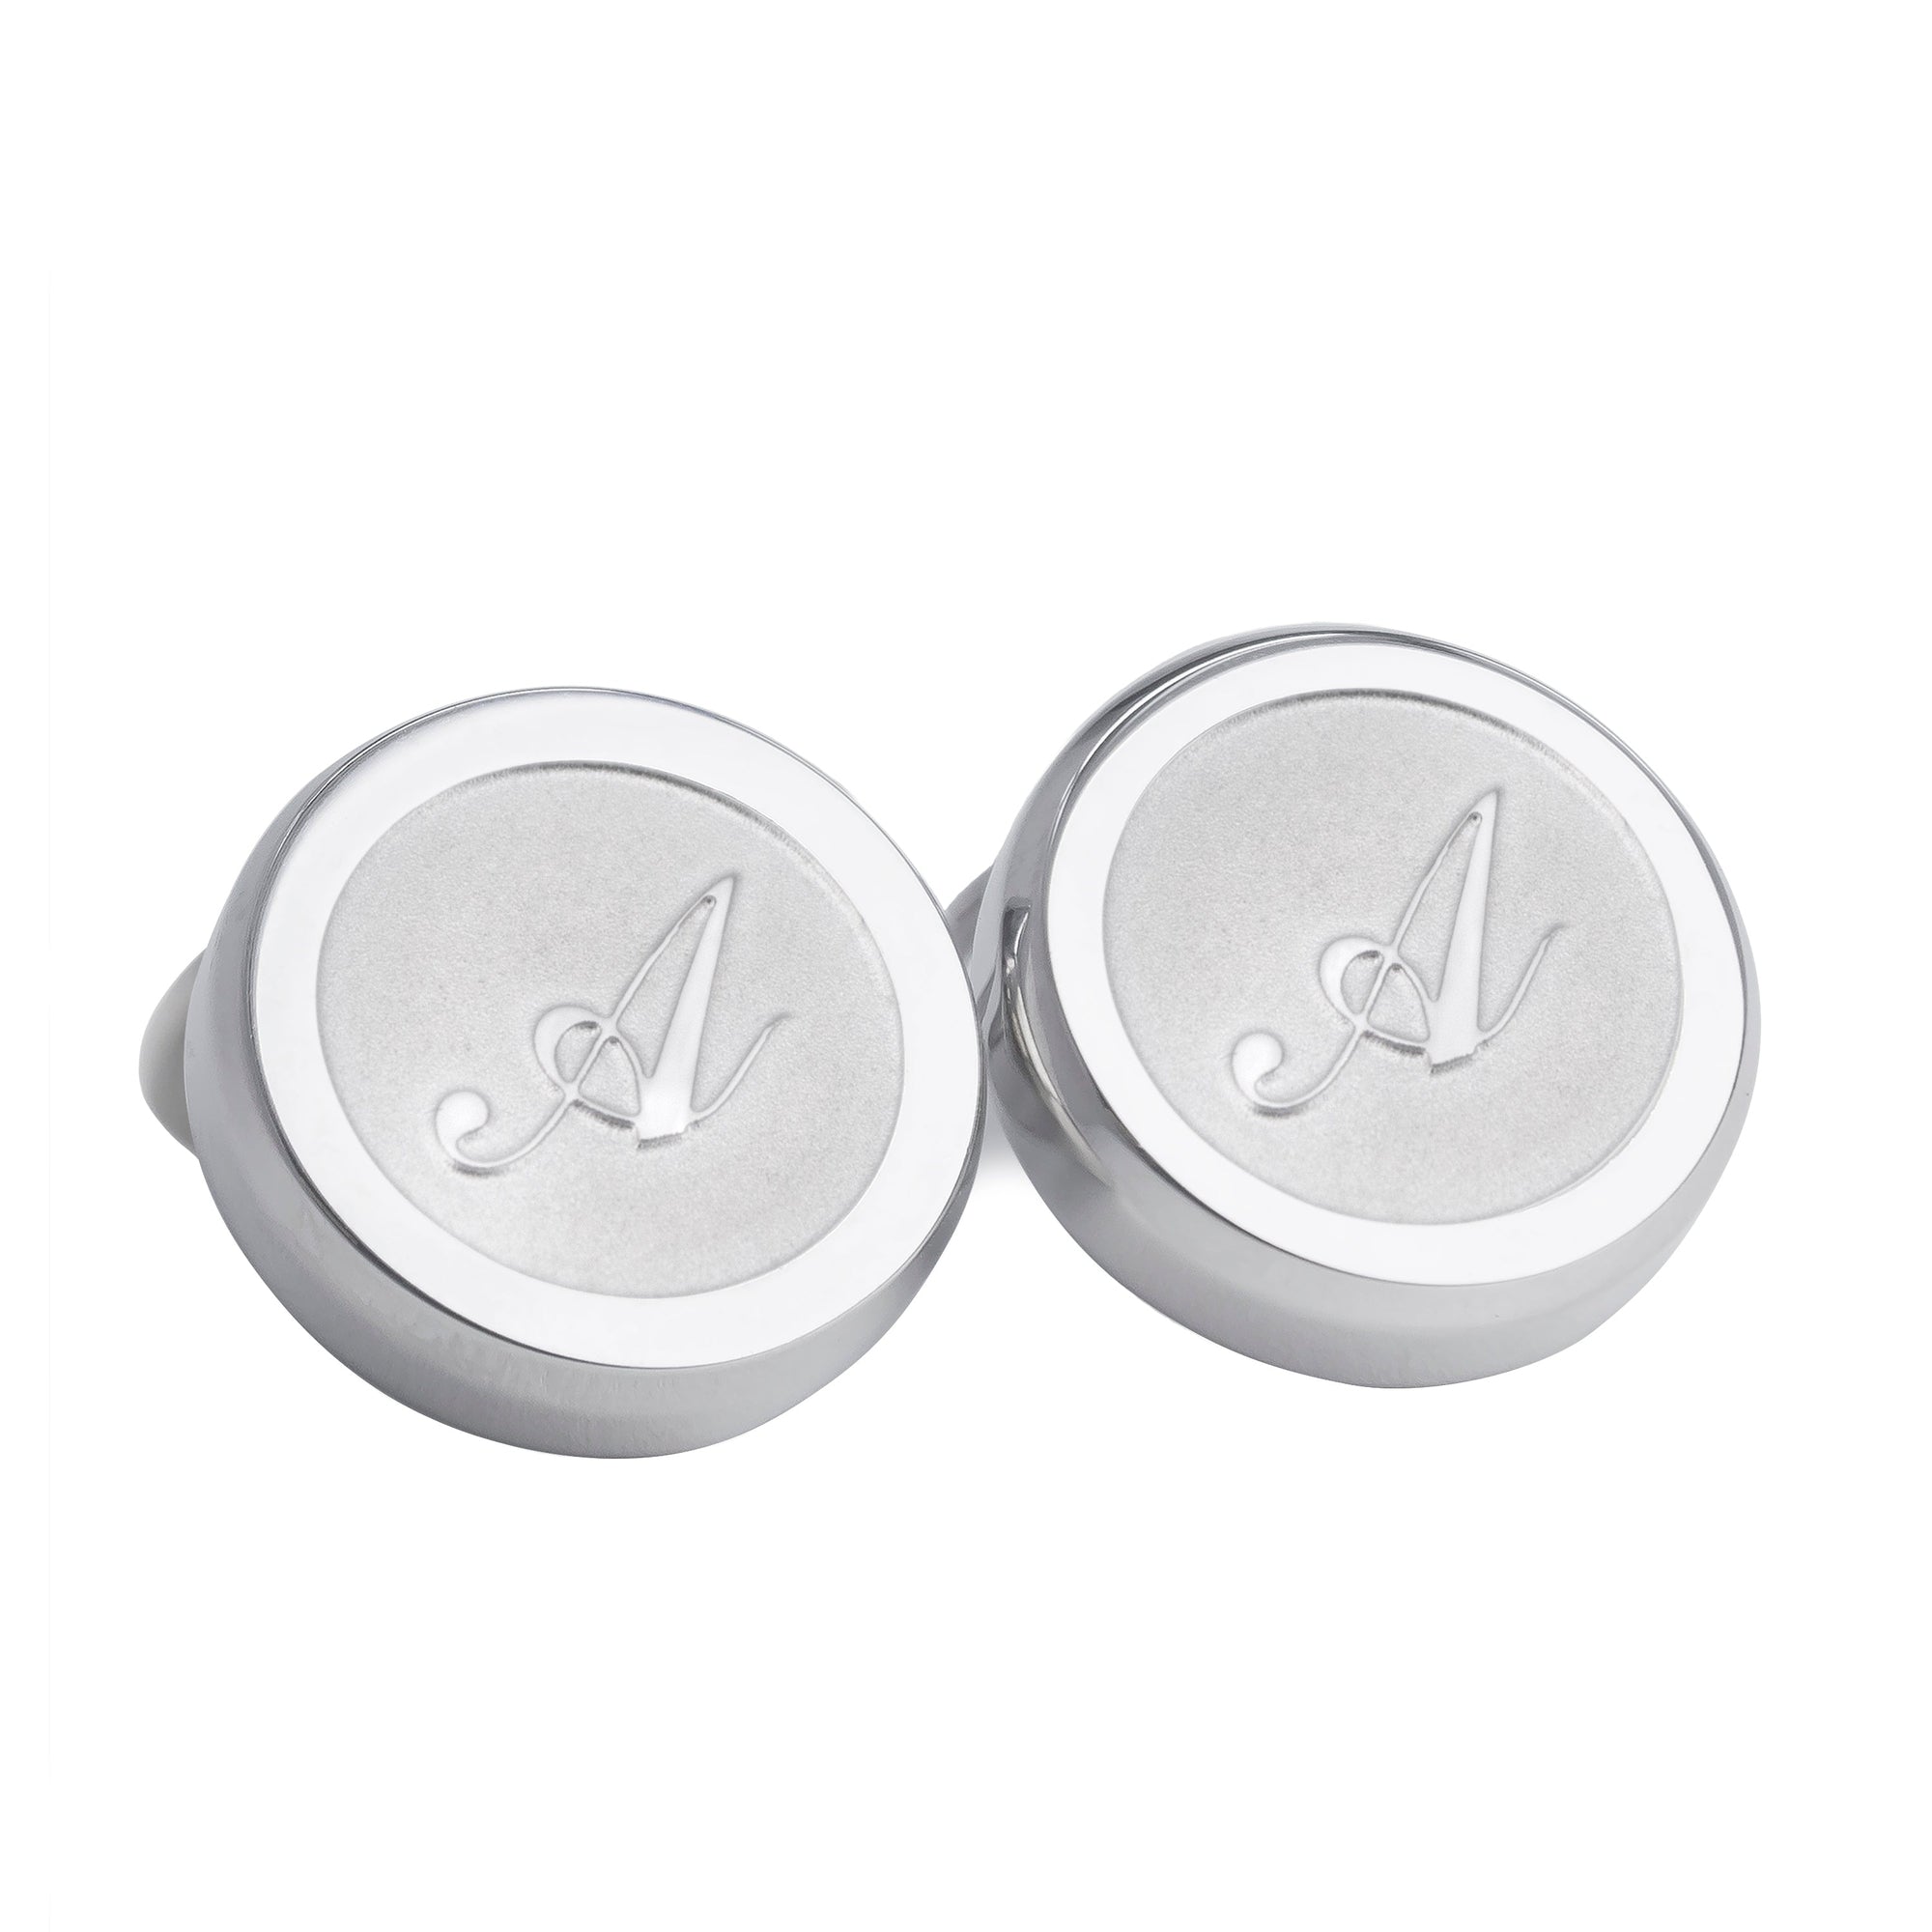 Monogram Etched Silver Clip-on Button Covers-Button Covers-A.Azthom-A-Cufflinks.com.sg